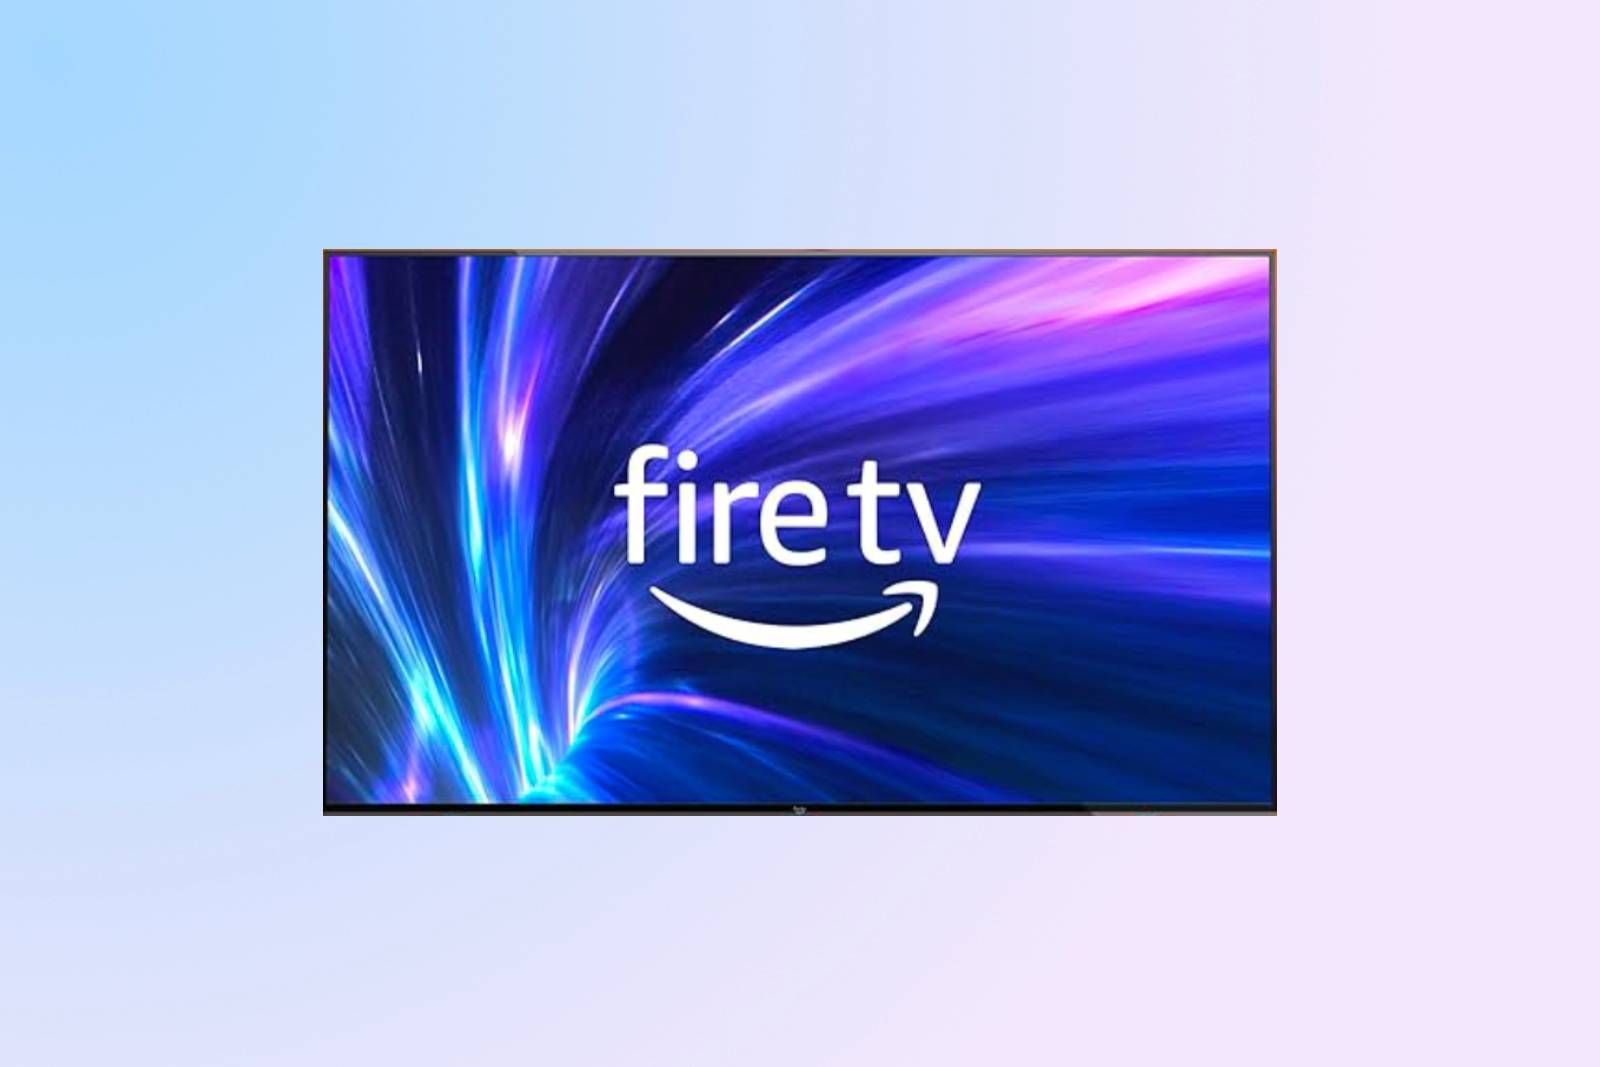 Amazon Fire TV 50%22 4-Series 4K UHD smart TV, stream live TV without cable